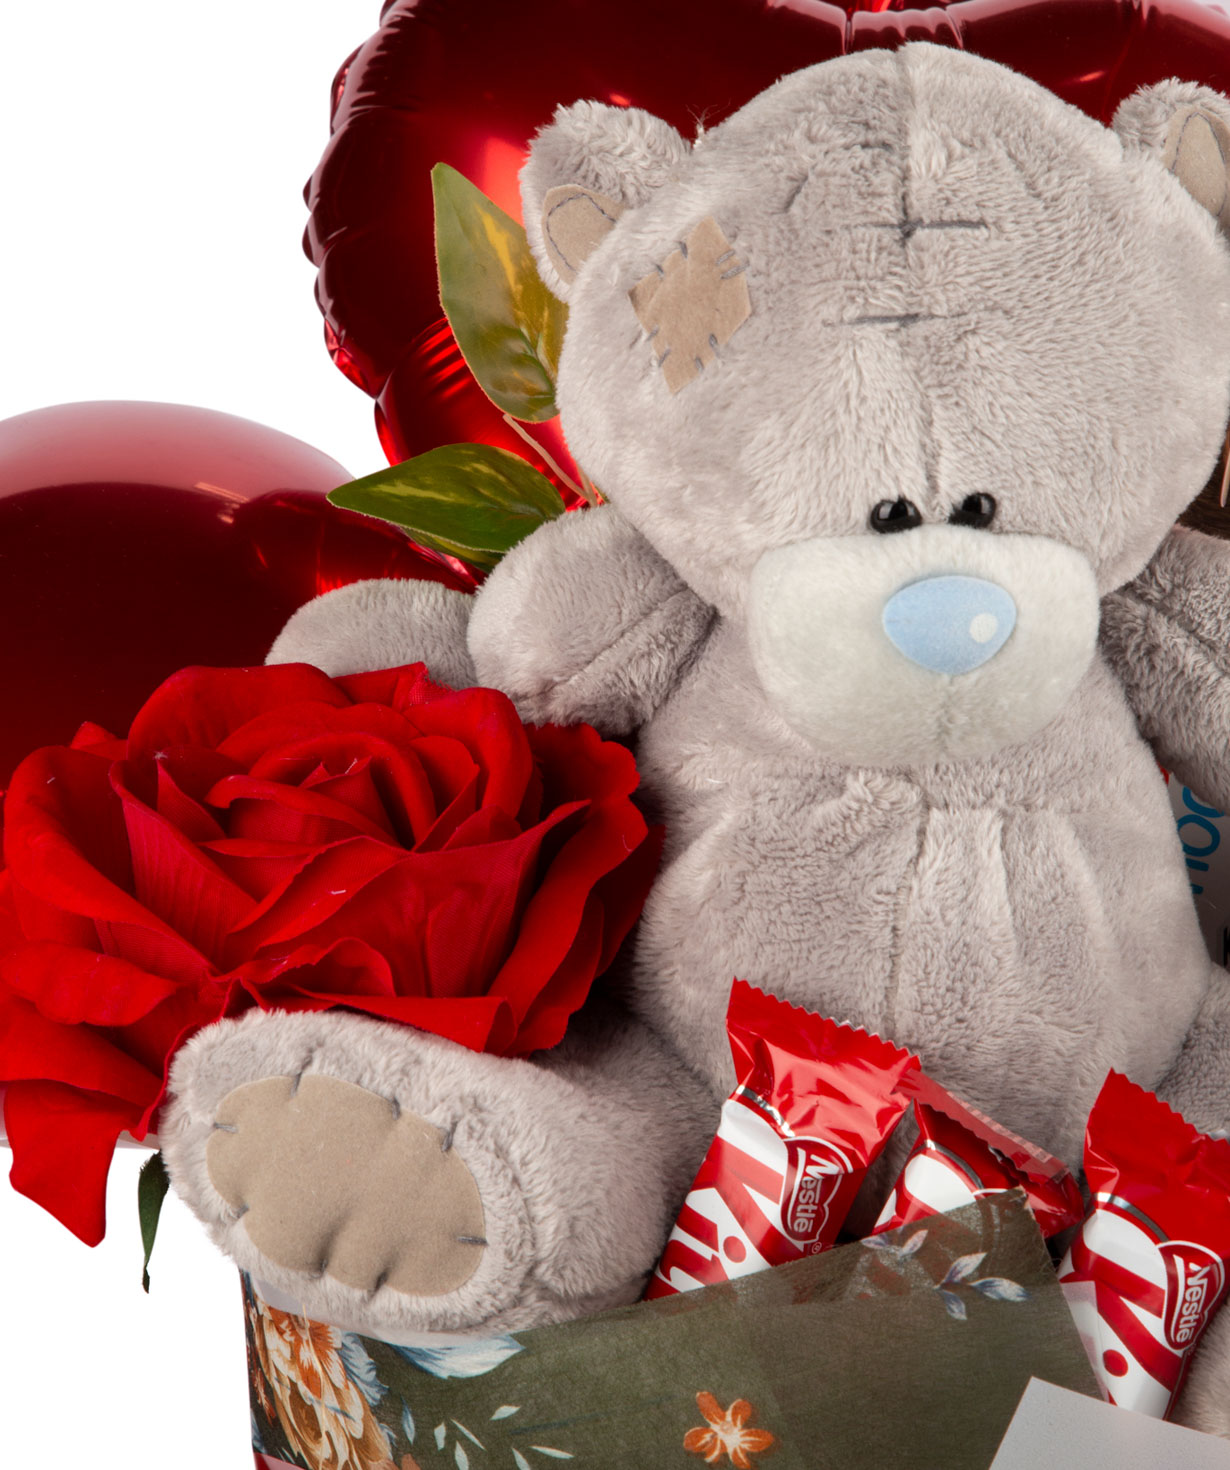 Bouquet `San Diego` with sweets, rose and teddy bear